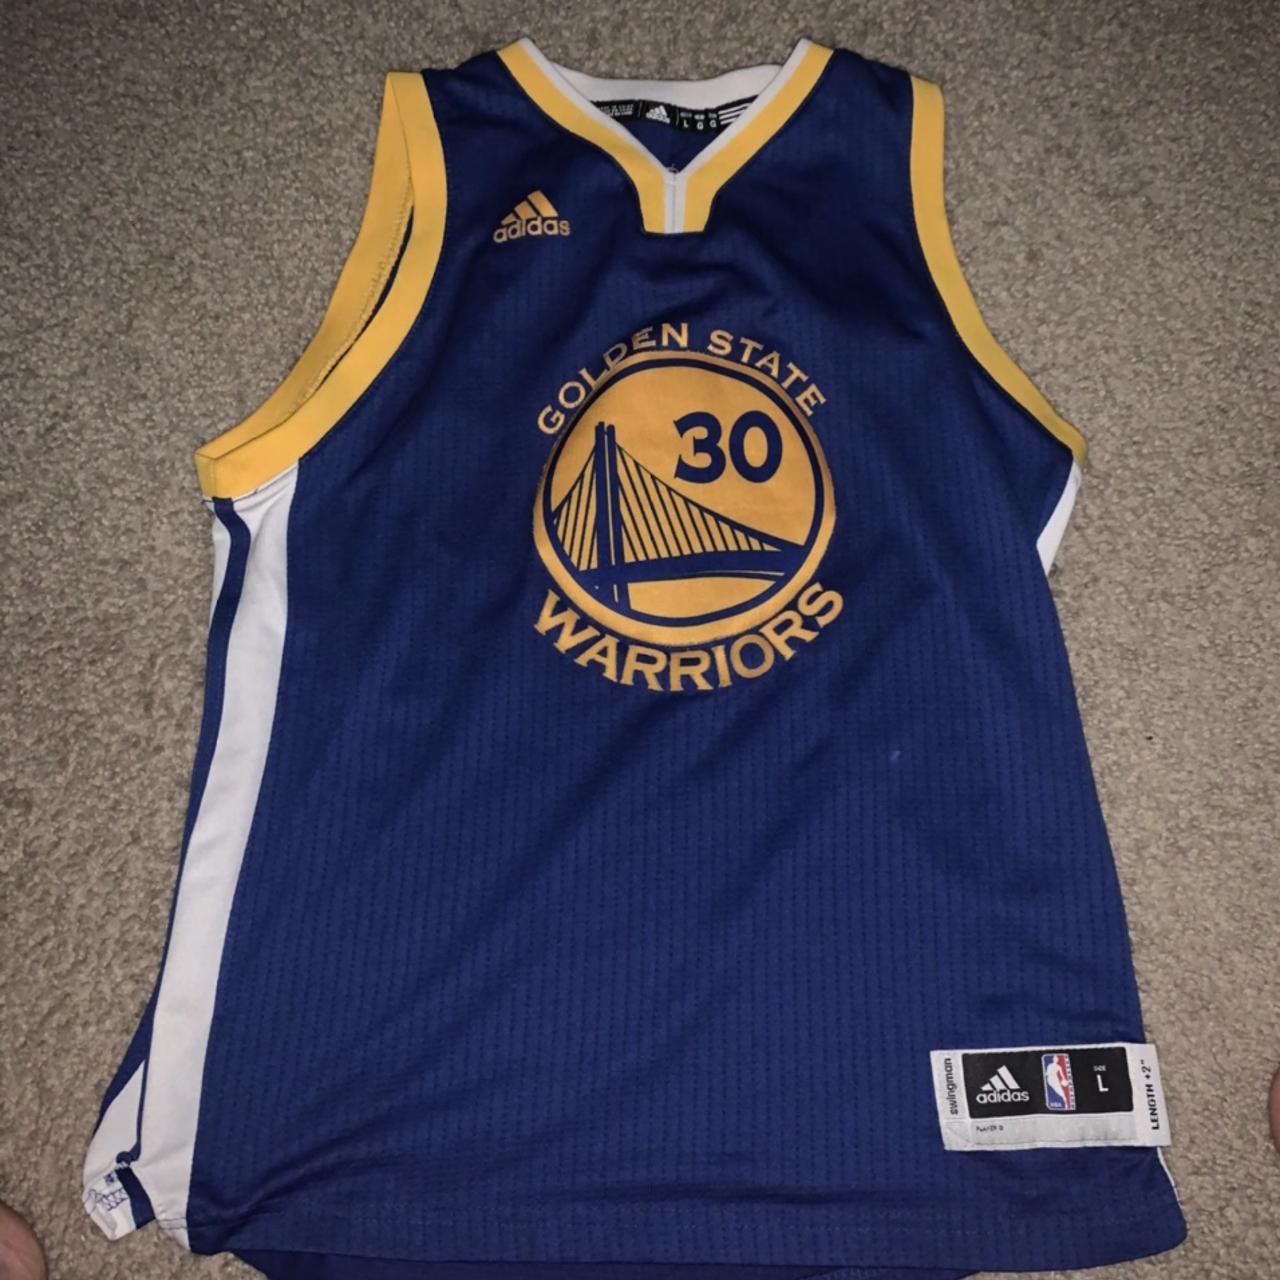 2016 Stephen Curry Jersey Youth Large #jersey - Depop